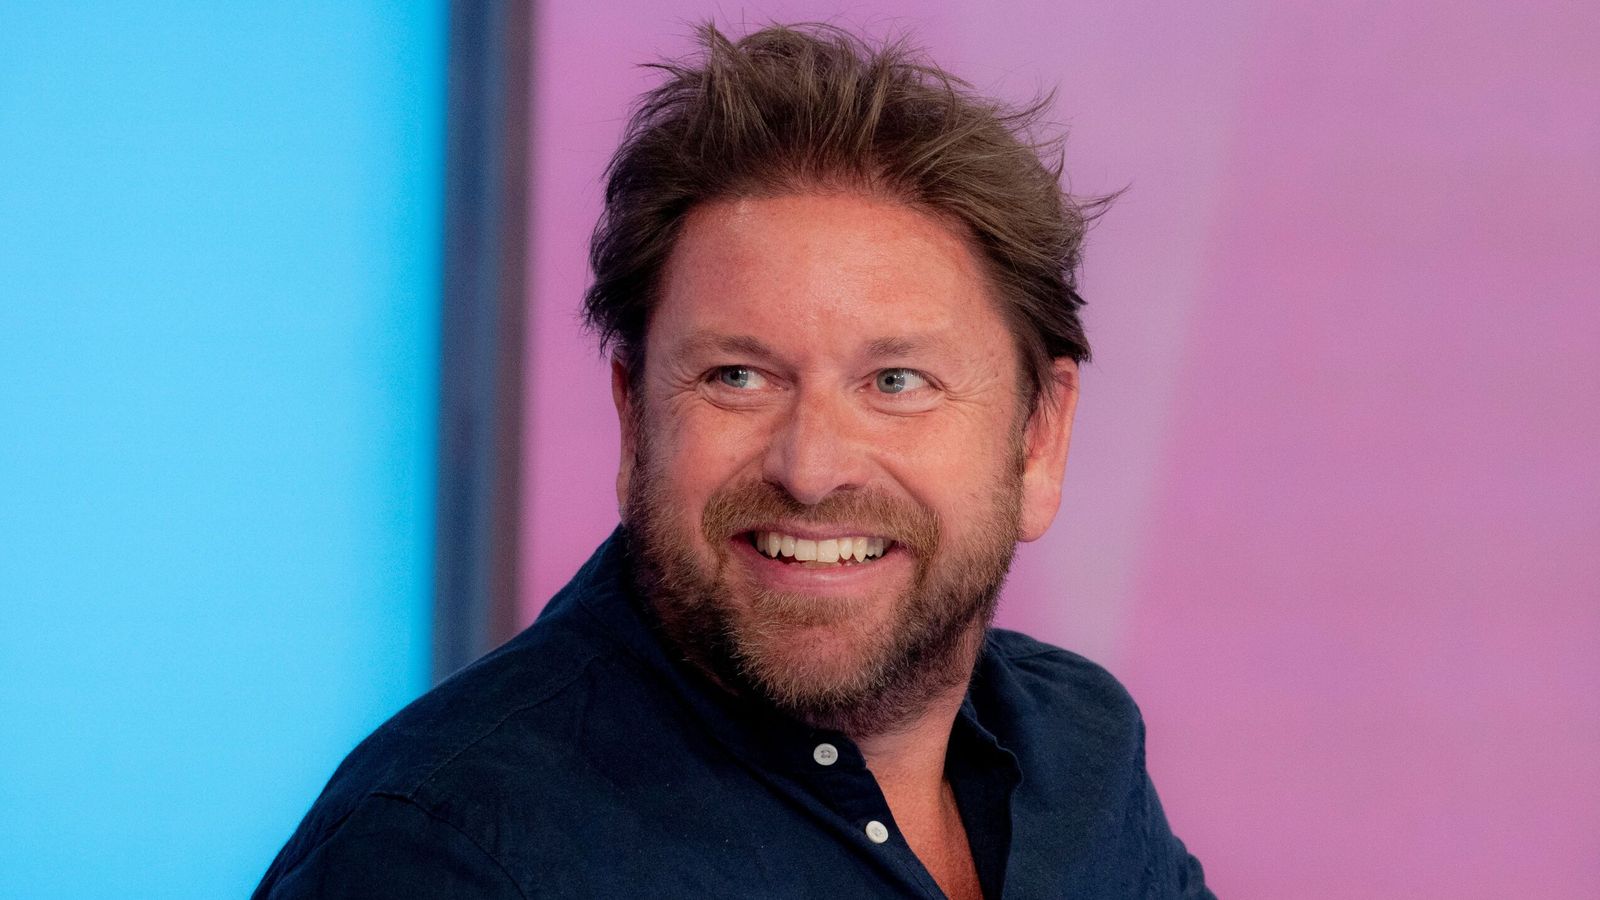 James Martin reveals cancer diagnosis amid bullying claims